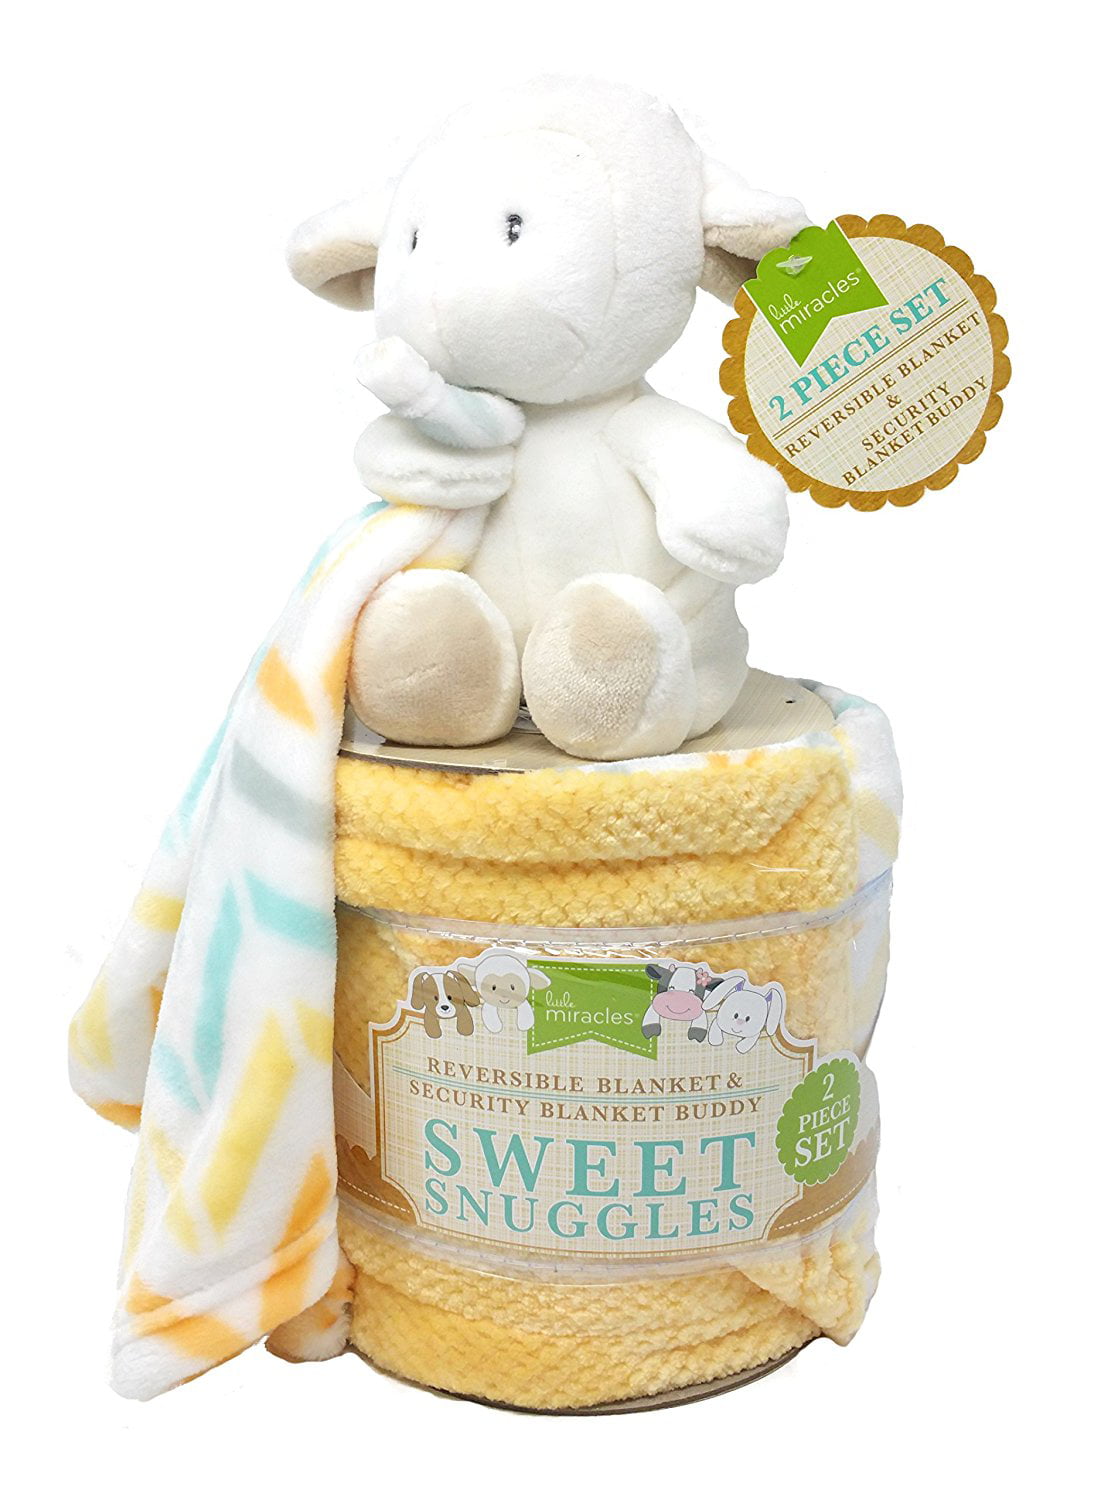 Sweet Snuggles 2 Piece Reversible Blanket And Security Blanket Sheep Buddy Set By Little Miracles Walmartcom Walmartcom